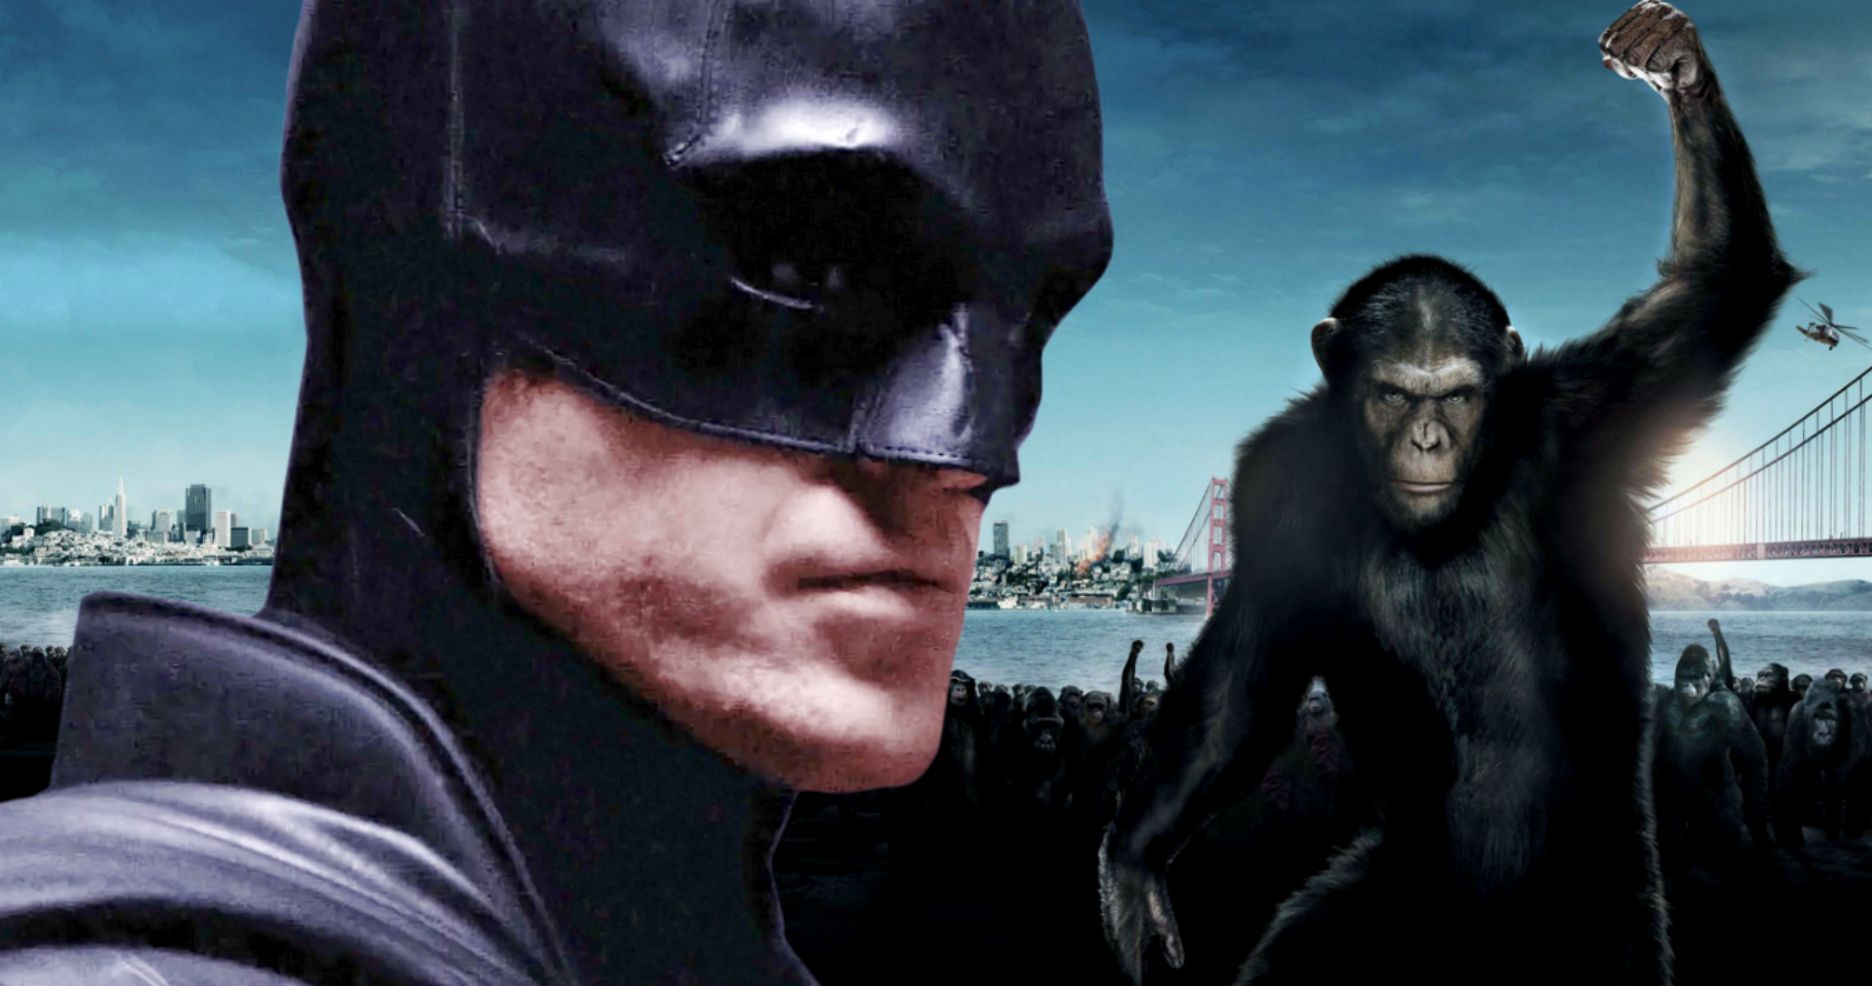 How The Batman Connects to Planet of the Apes According to Director Matt Reeves